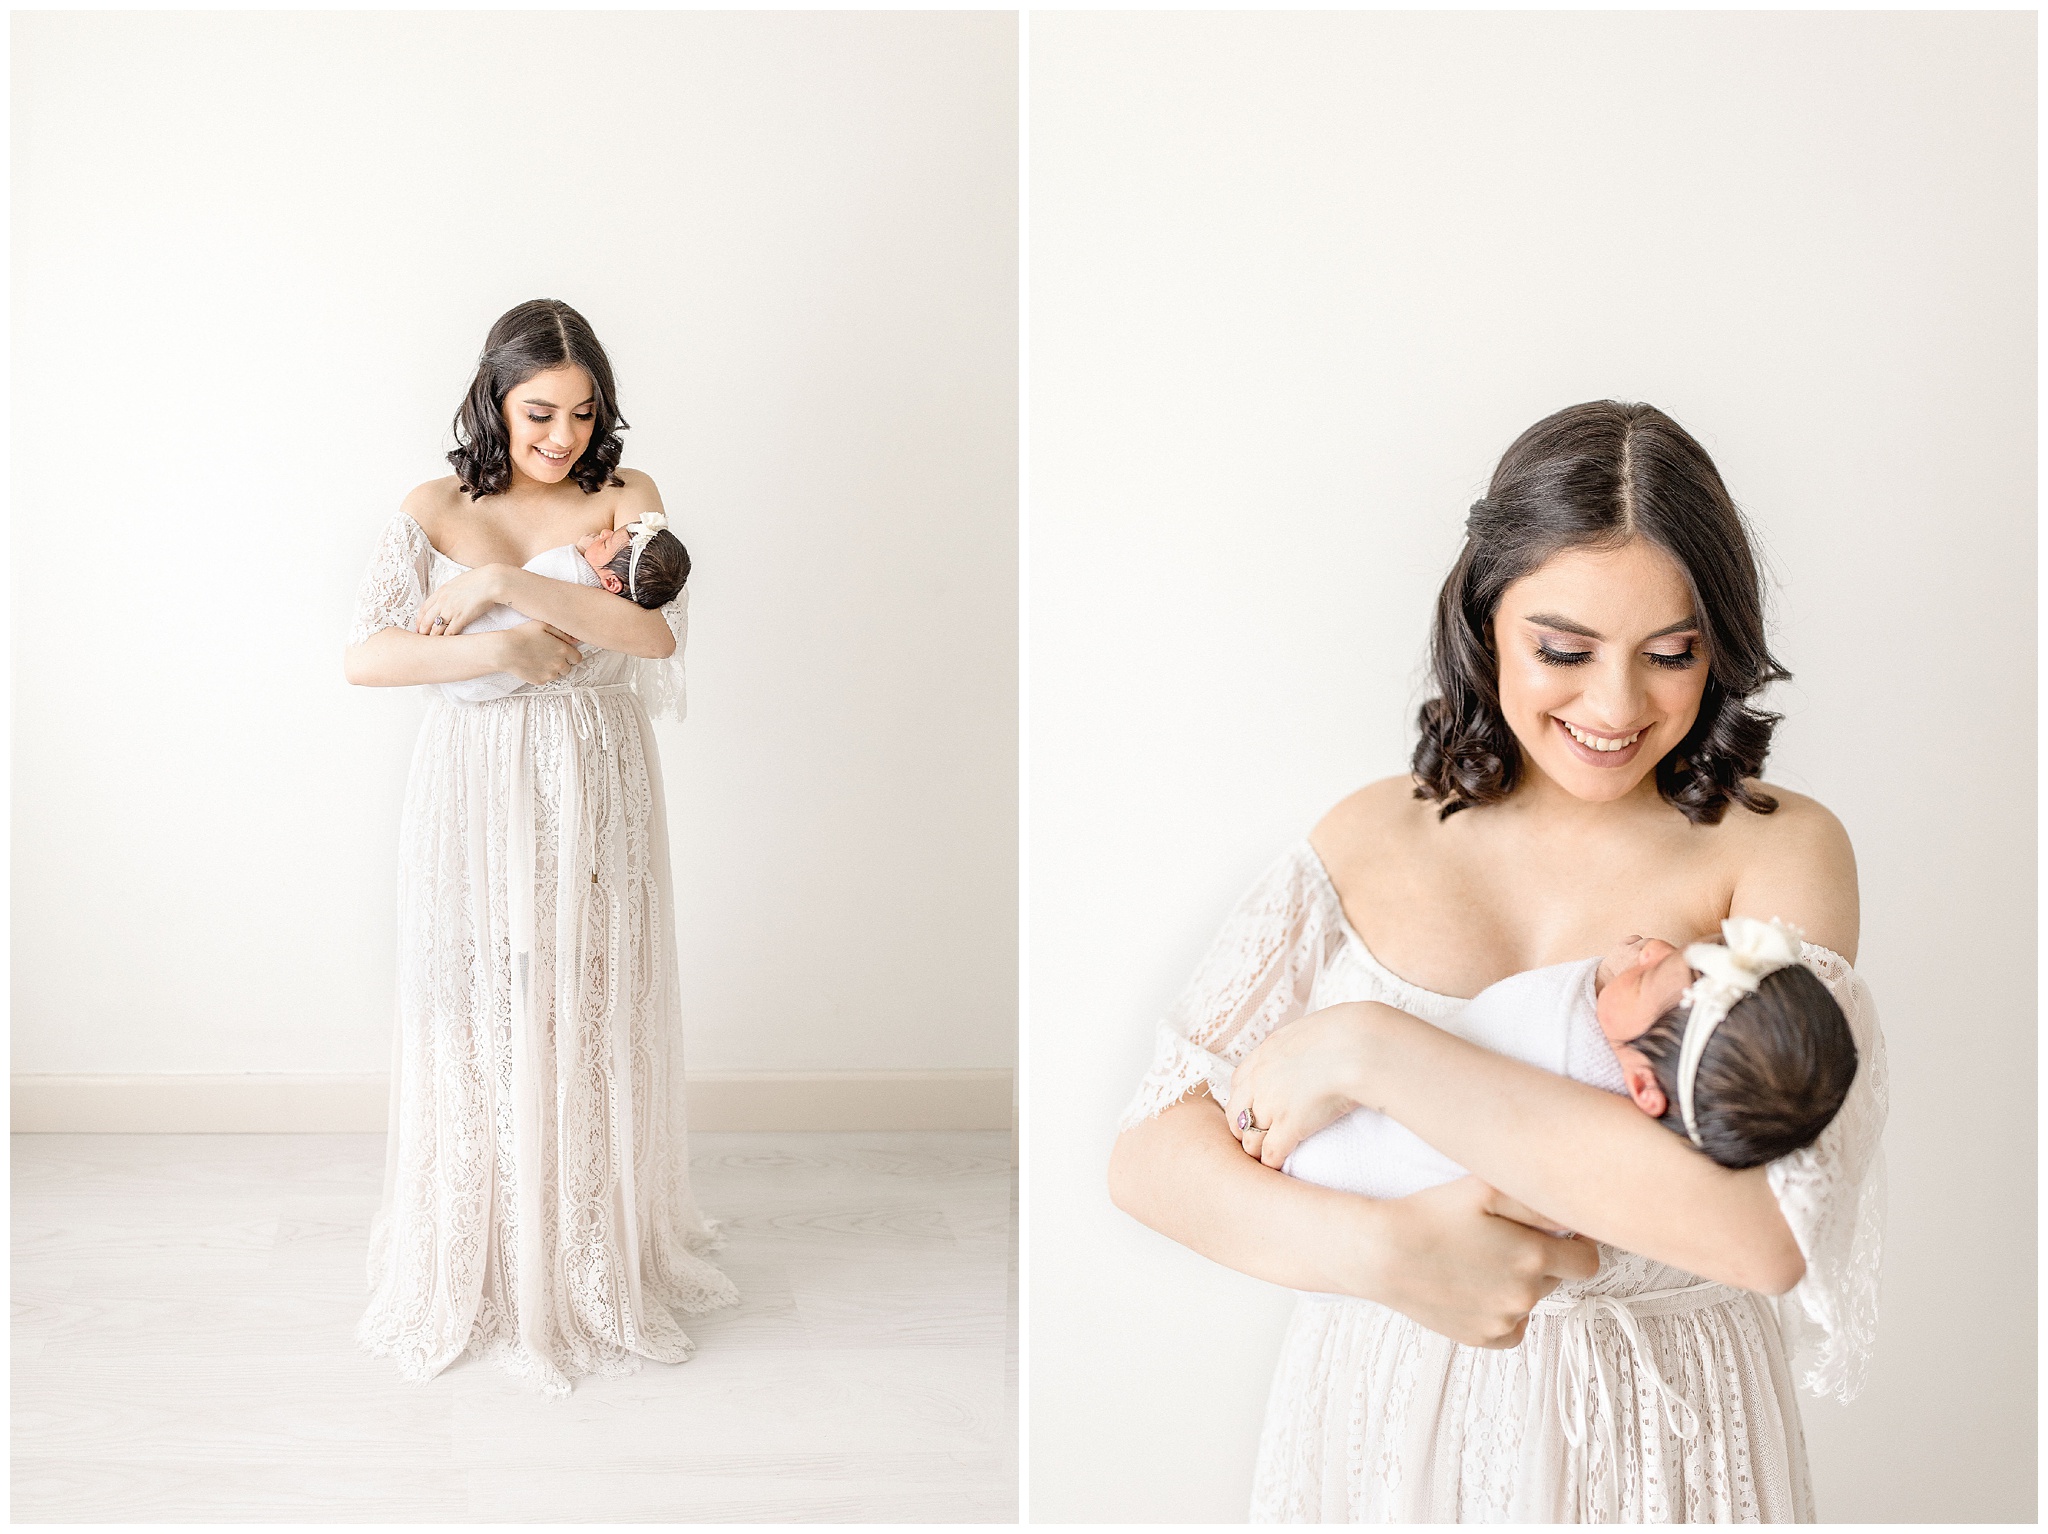 Mom holds her baby in Miami studio. Photo by Ivanna Vidal Photography.